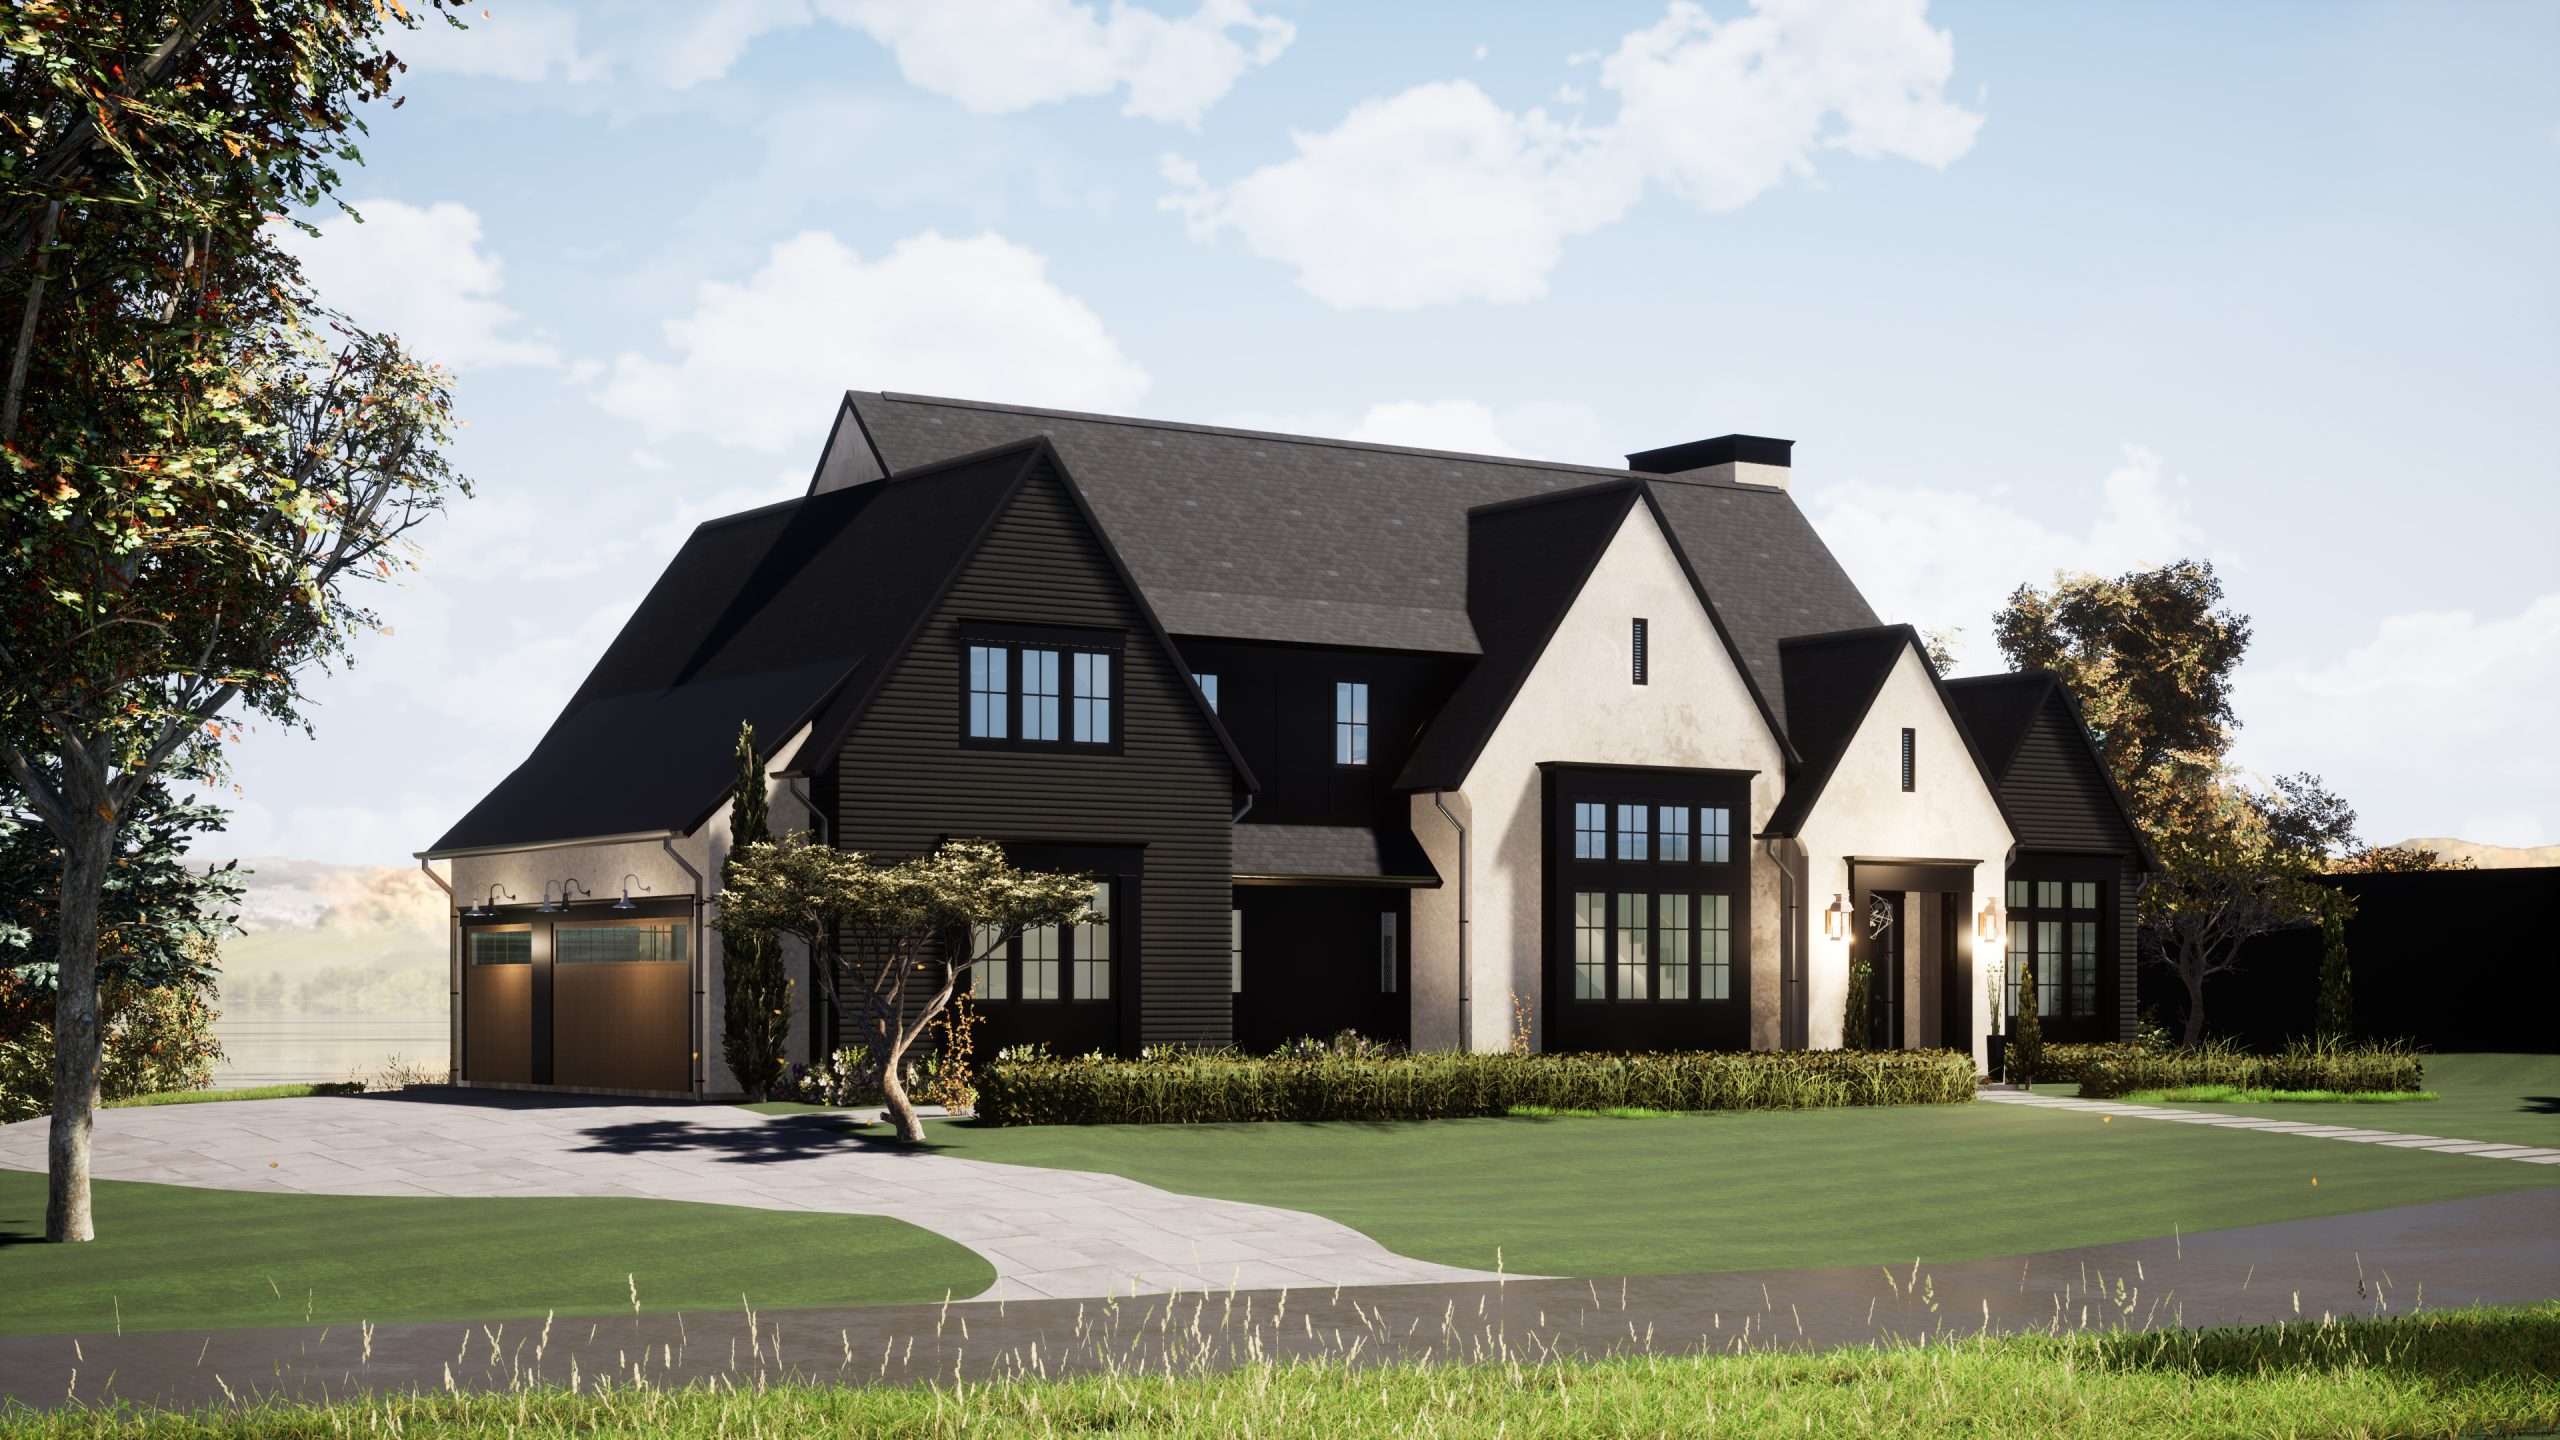 2021 Spring Parade of Homes Dream Home by Stonewood, LLC